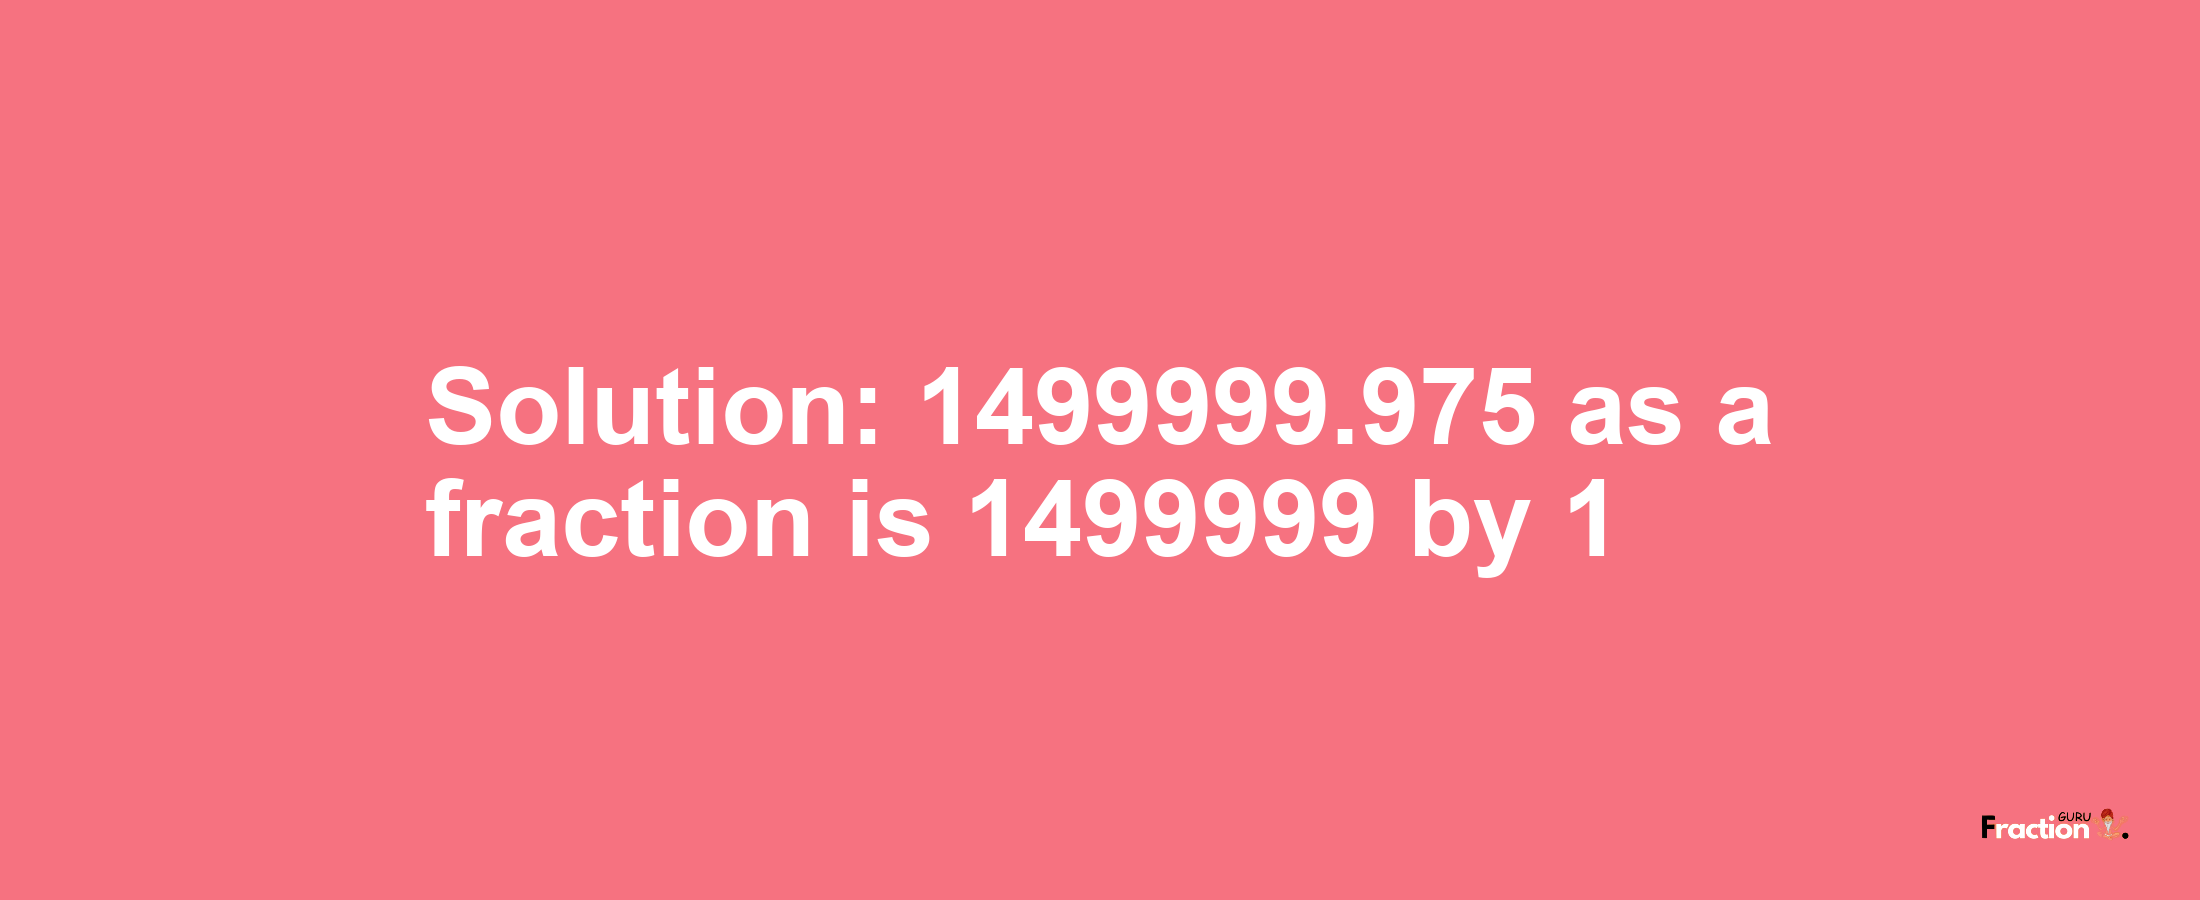 Solution:1499999.975 as a fraction is 1499999/1